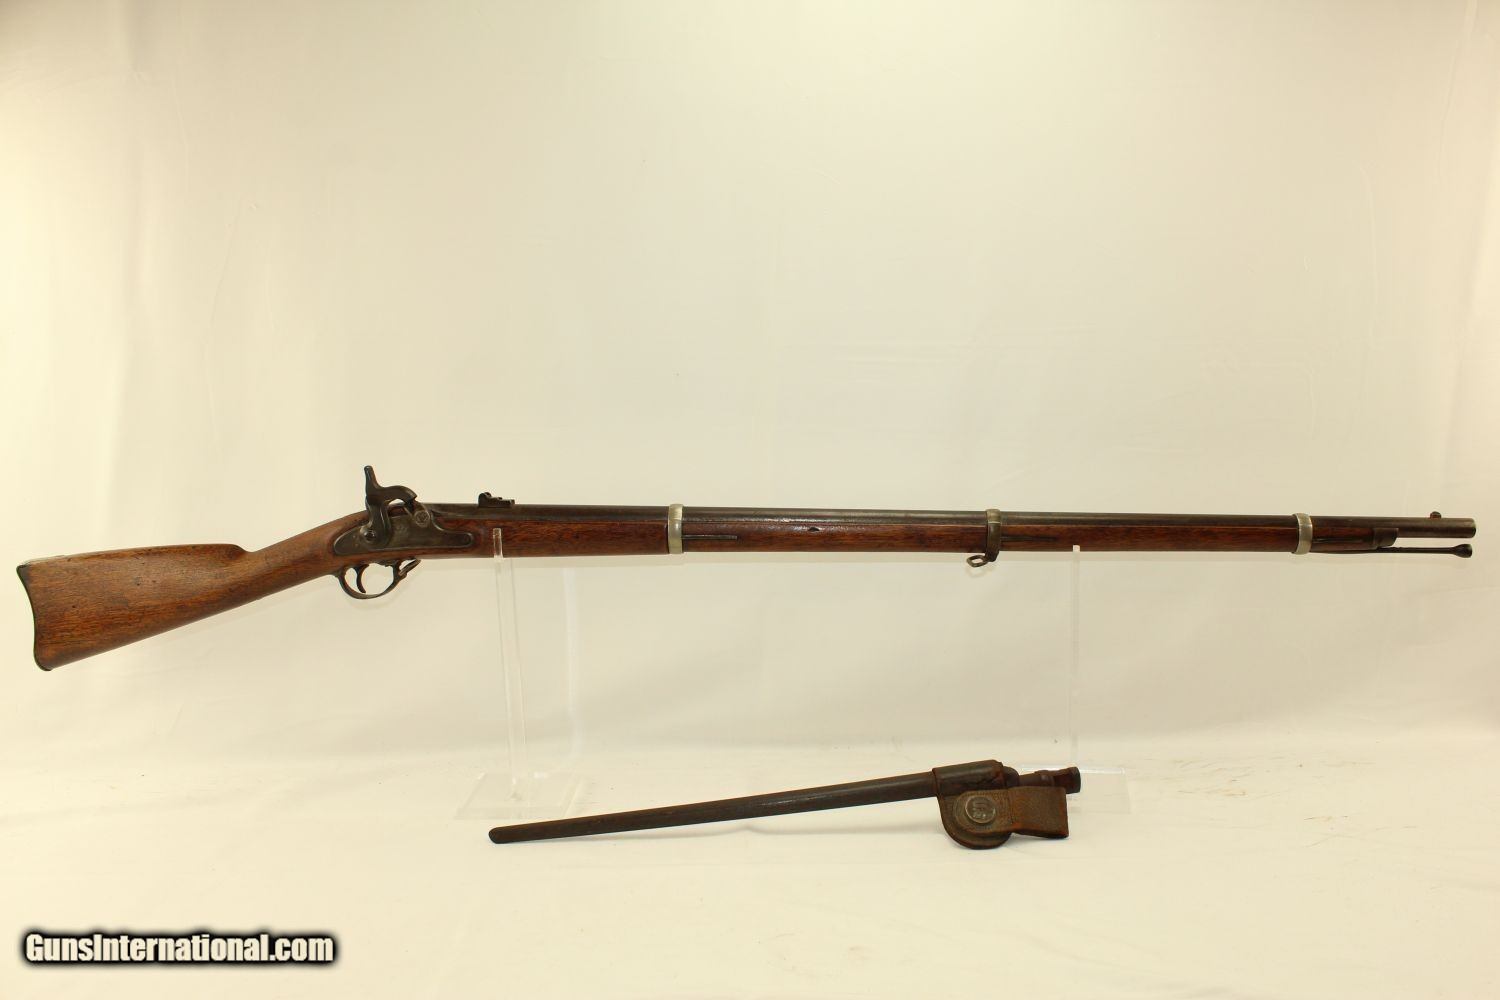 CIVIL-WAR-Springfield-US-Model-1863-Type-II-MUSKET-Made-at-the-SPRINGFIELD-ARMORY-with-BAYONET...jpg